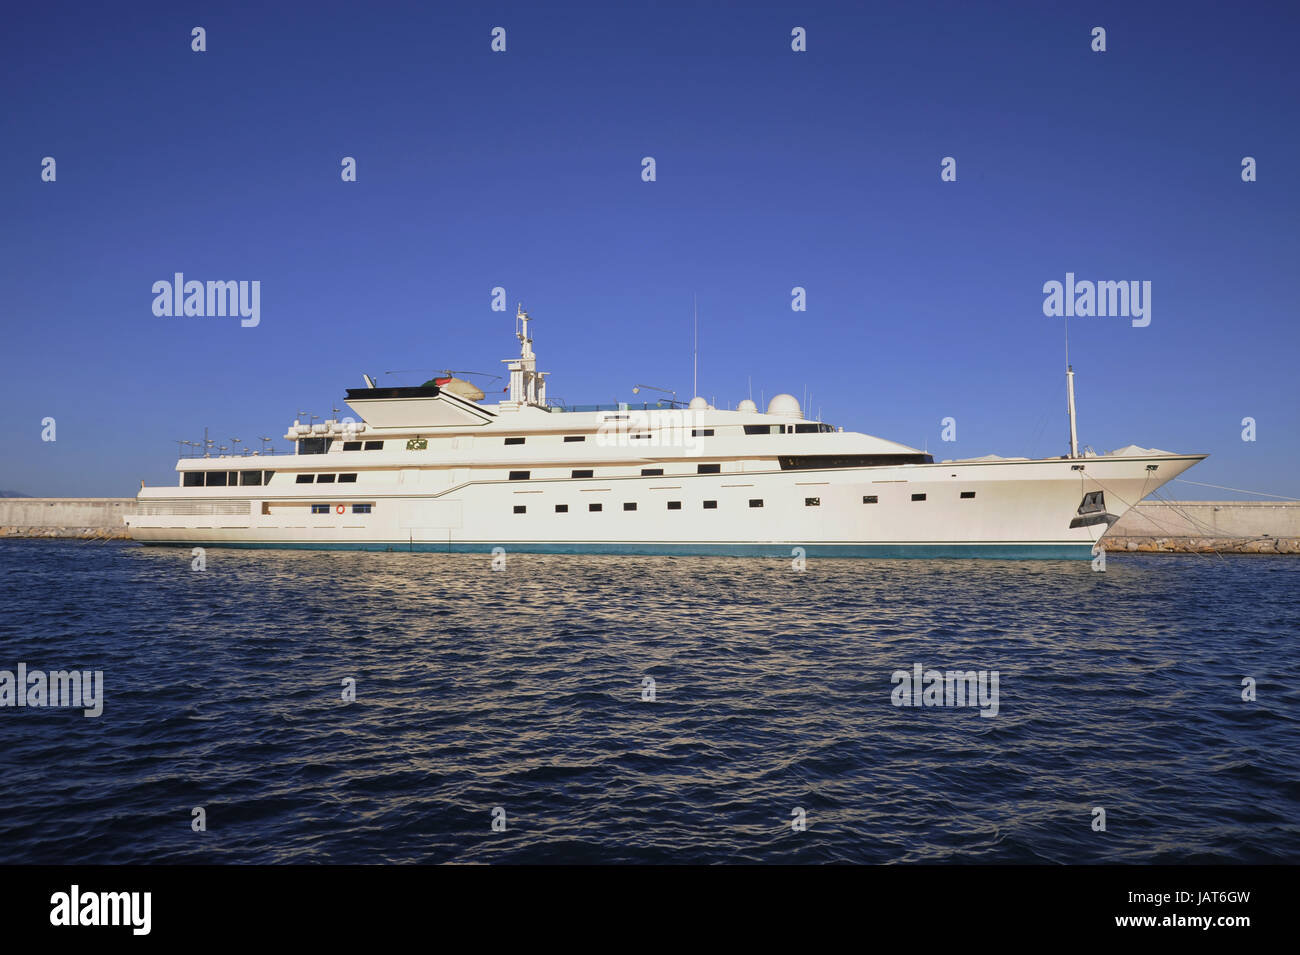 the Nabila yacht, formerly property of Saudi billionaire Adnan Kashoggi, resold in 1989 to Donald Trump who changed its name to Trump Princess, last owner known the Saudi emir Al-Walid bin Talal; built by Benetti shipyard in Viareggio in 1980, was then the largest private yacht in the world. Stock Photo